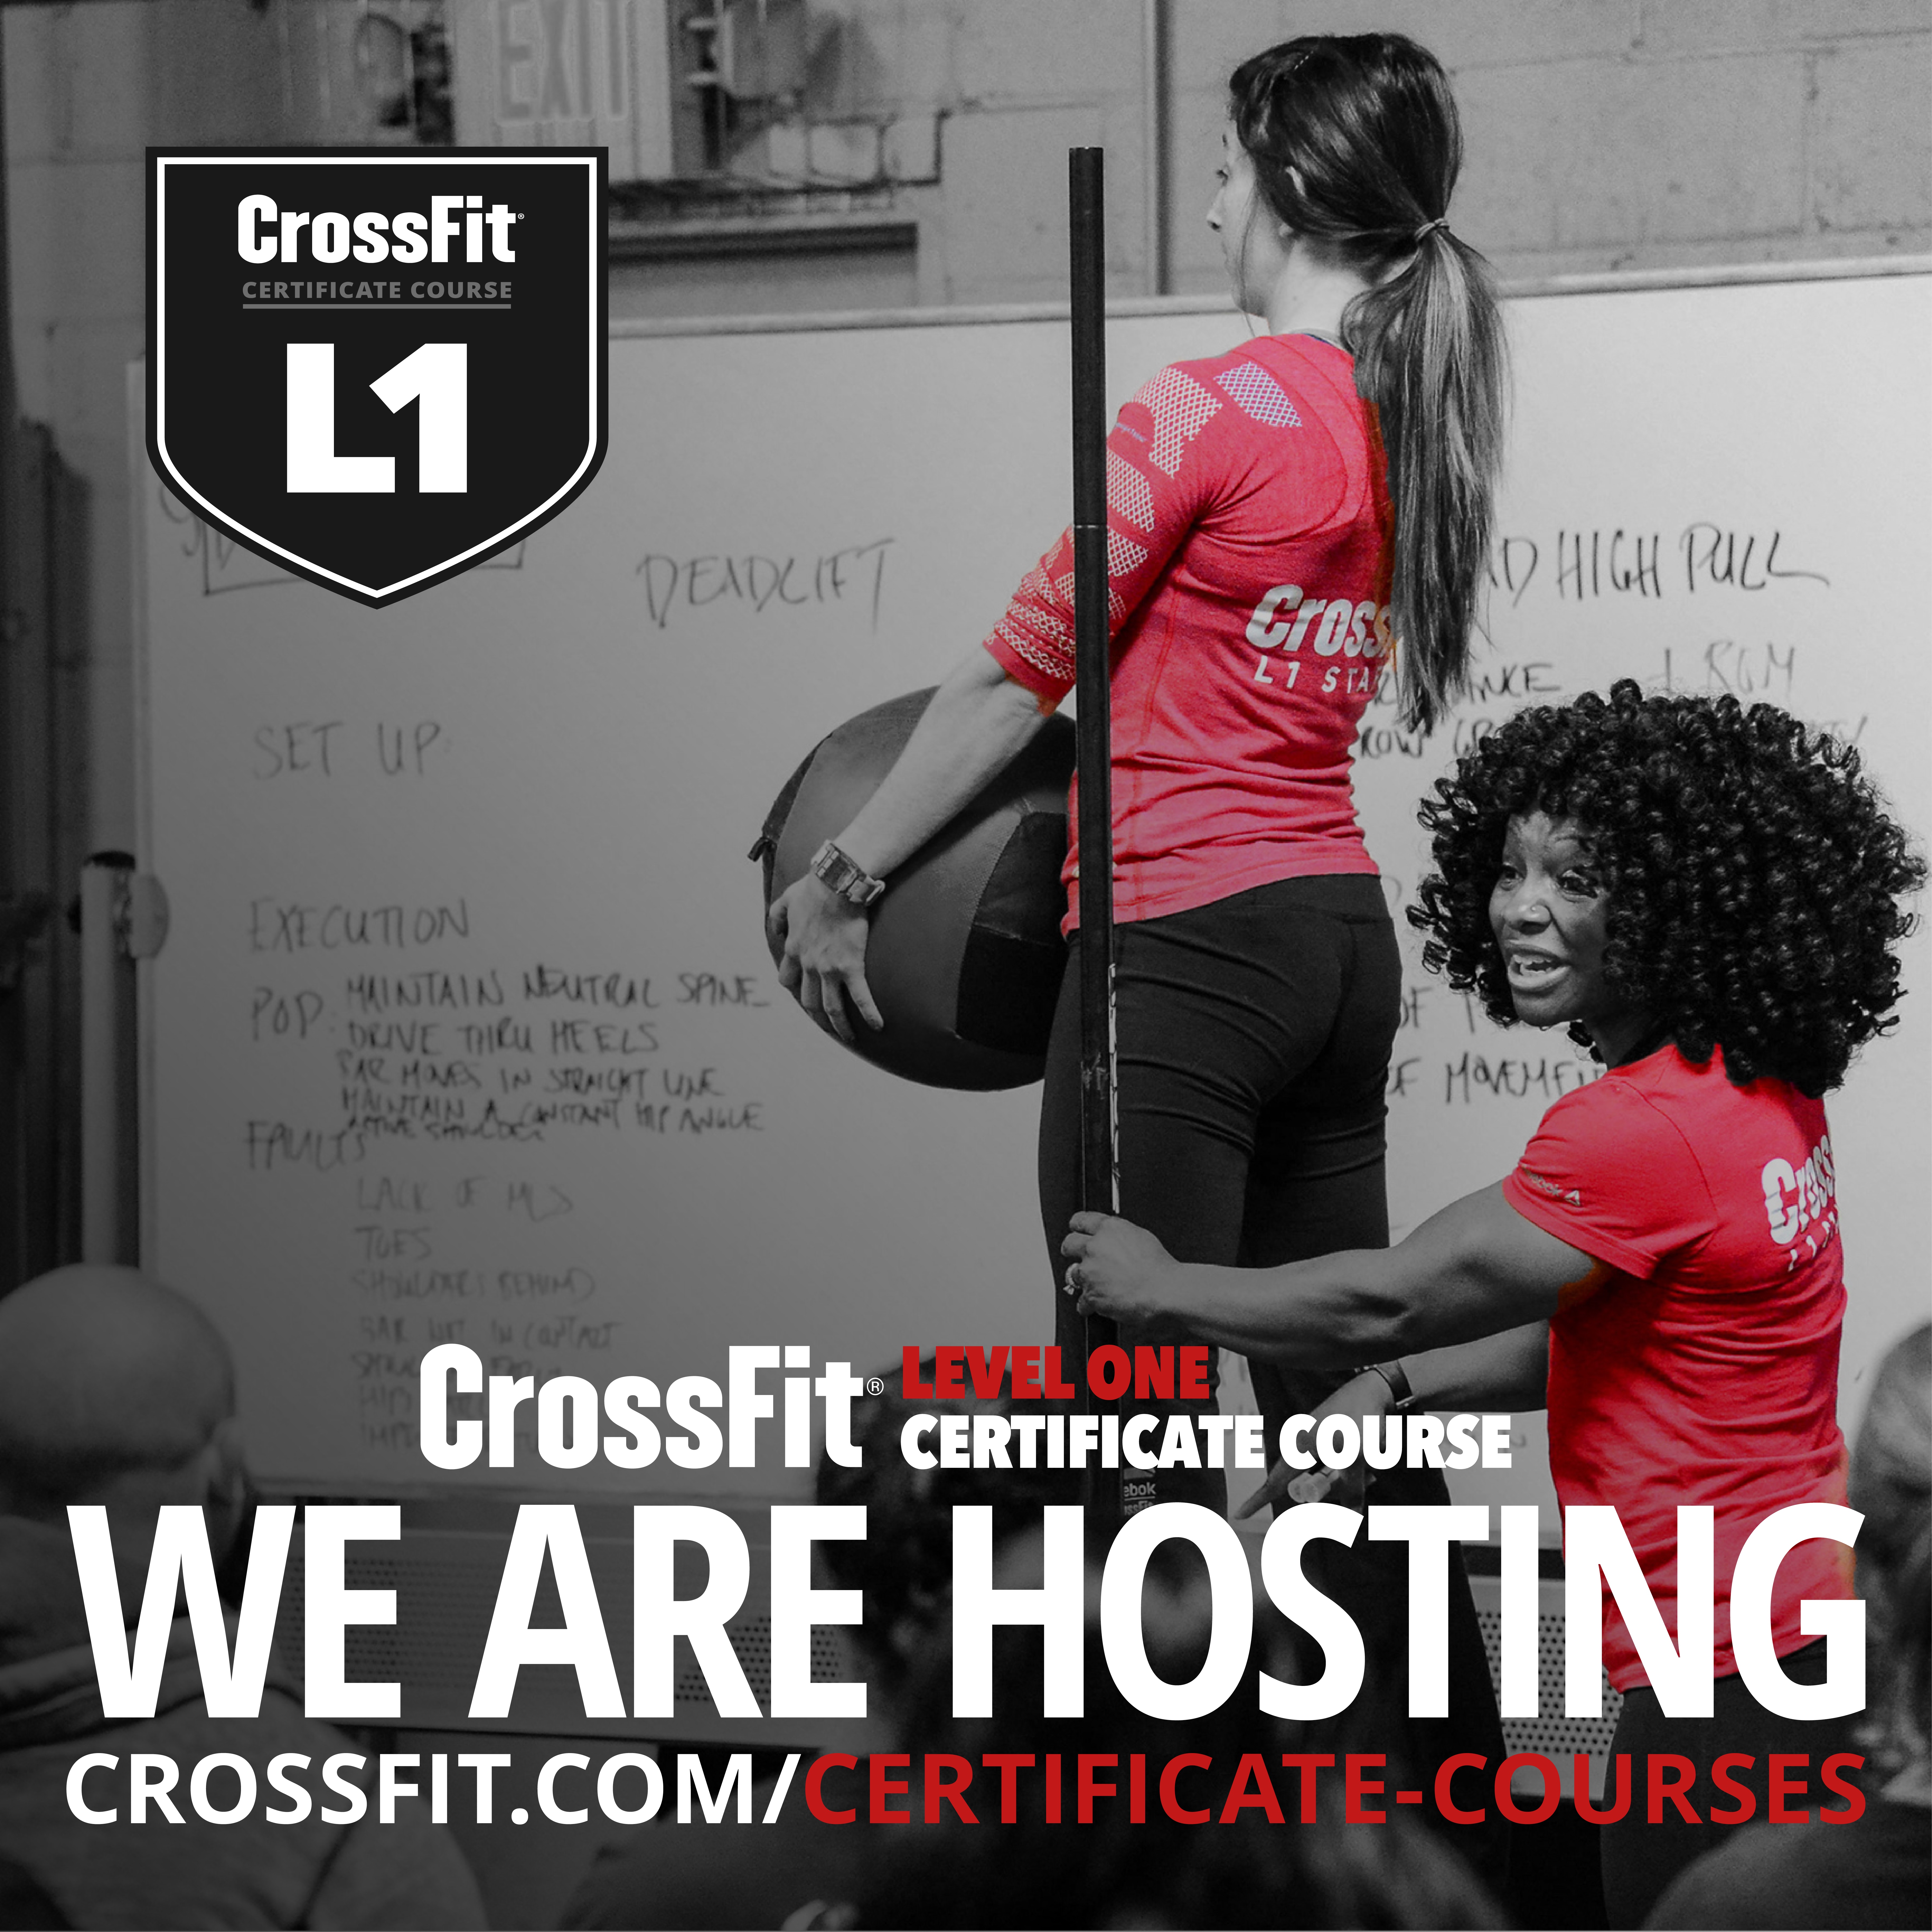 CROSSFIT LEVEL 1 THIS WEEKEND